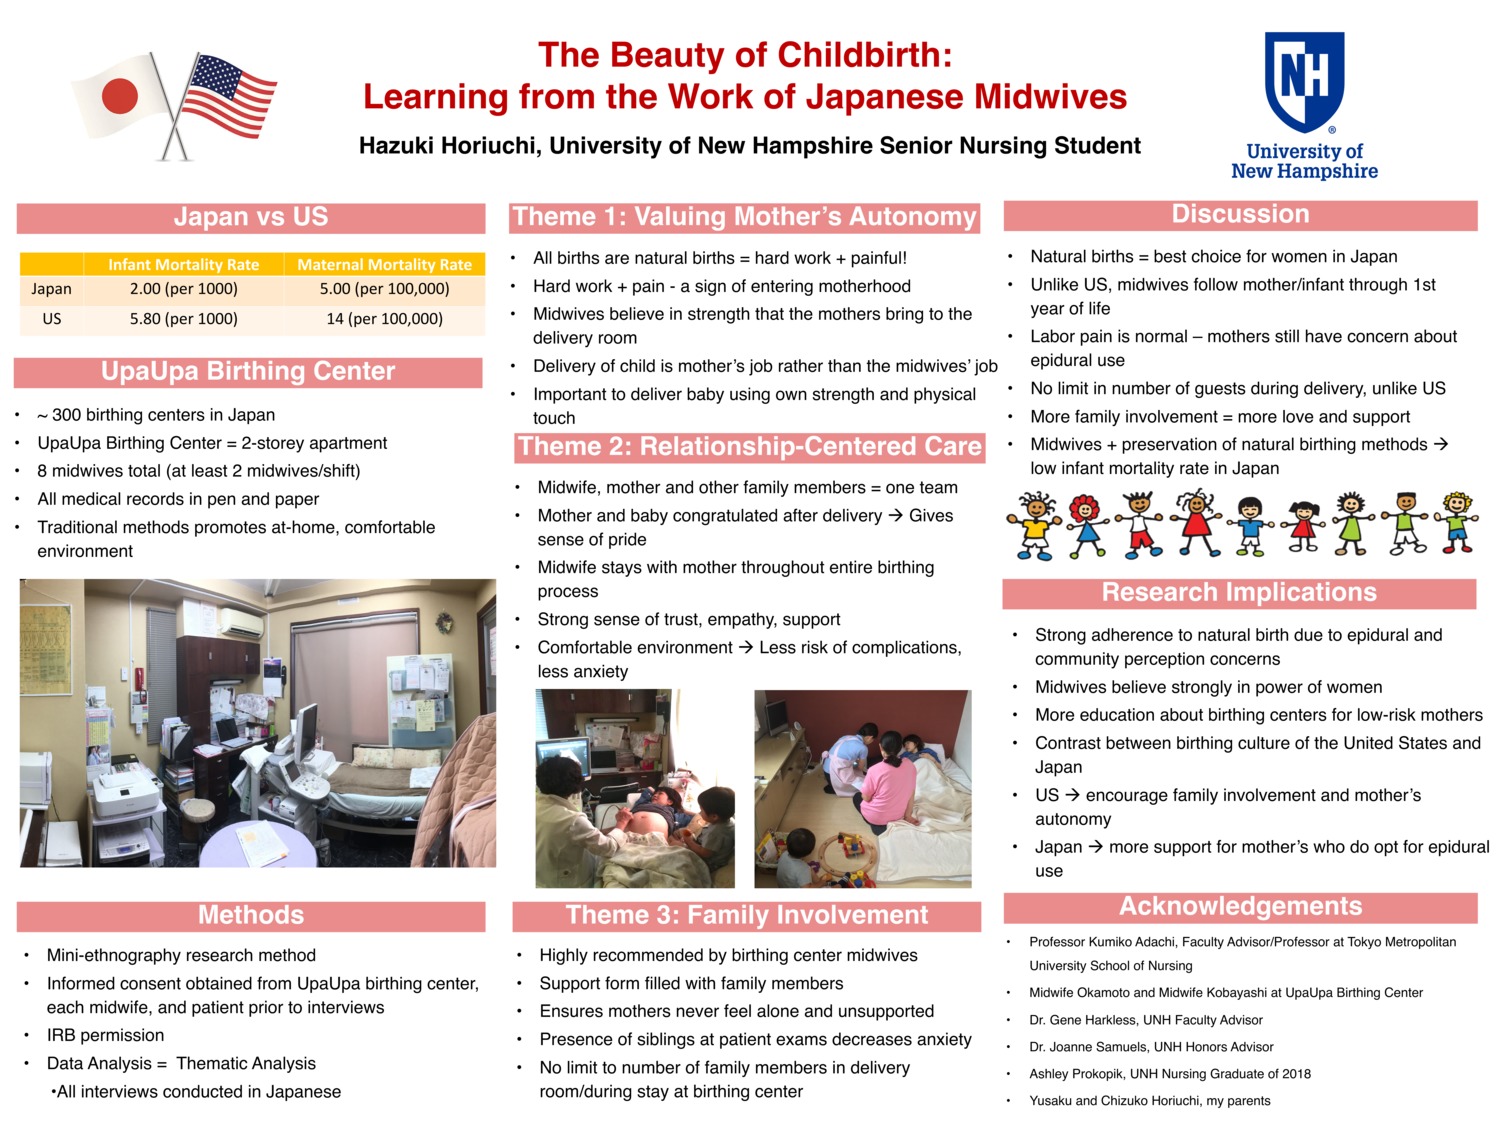 The Beauty Of Childbirth: Learning From The Work Of Japanese Midwives by hh1009